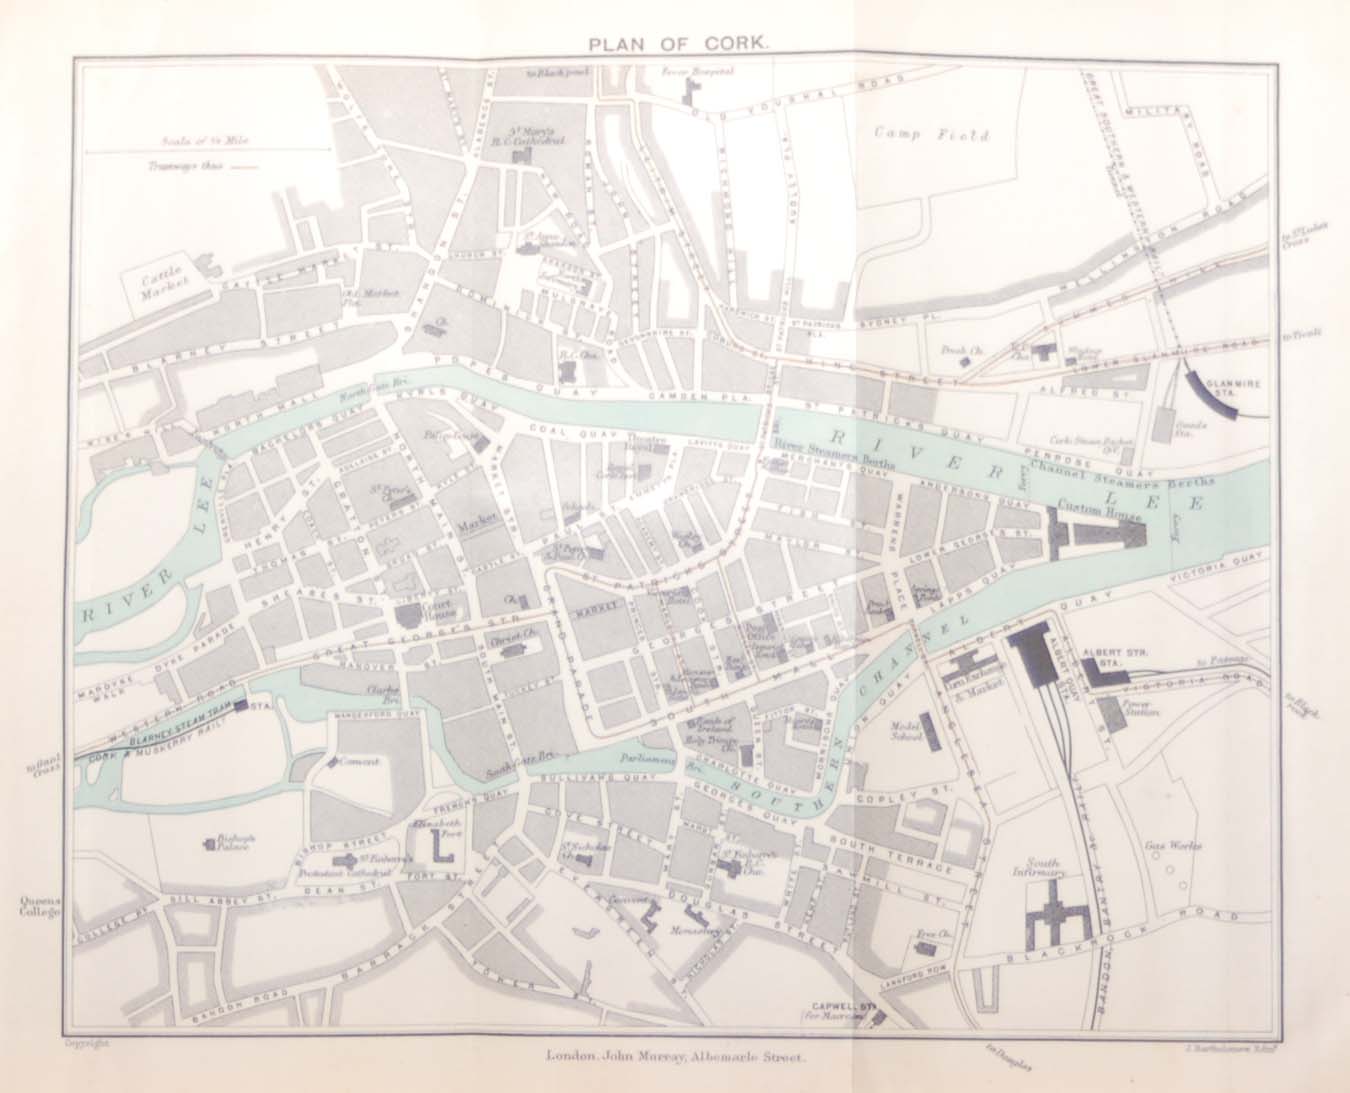 Antique plan, a map of Cork from 1902. The map was originally produced as part of a guide for visitors to Ireland.